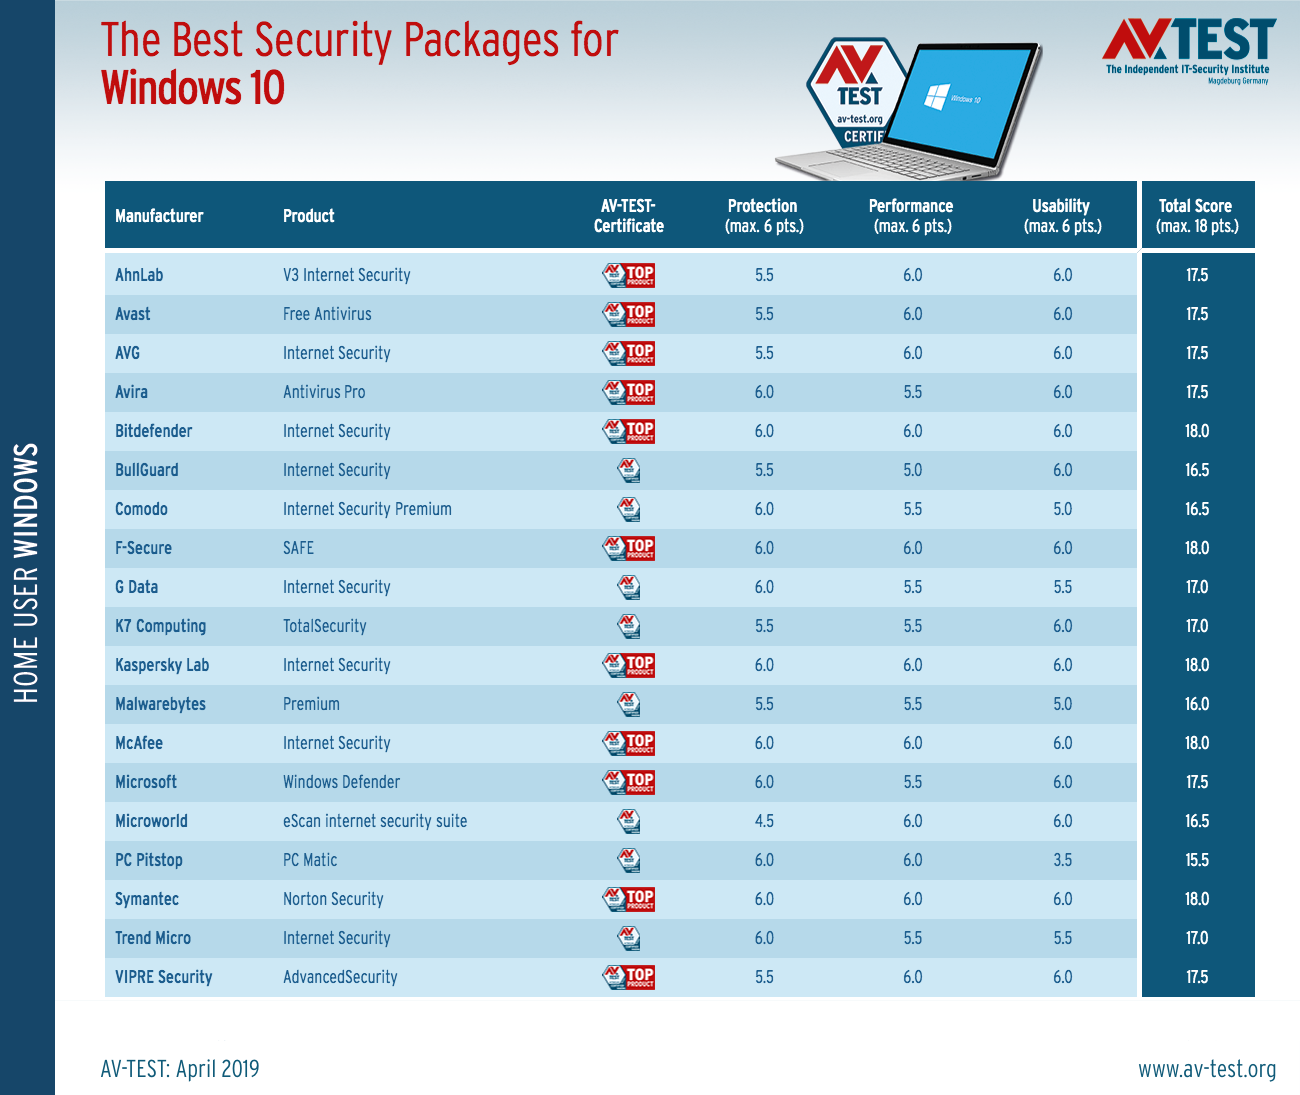 The best security packages for windows 10